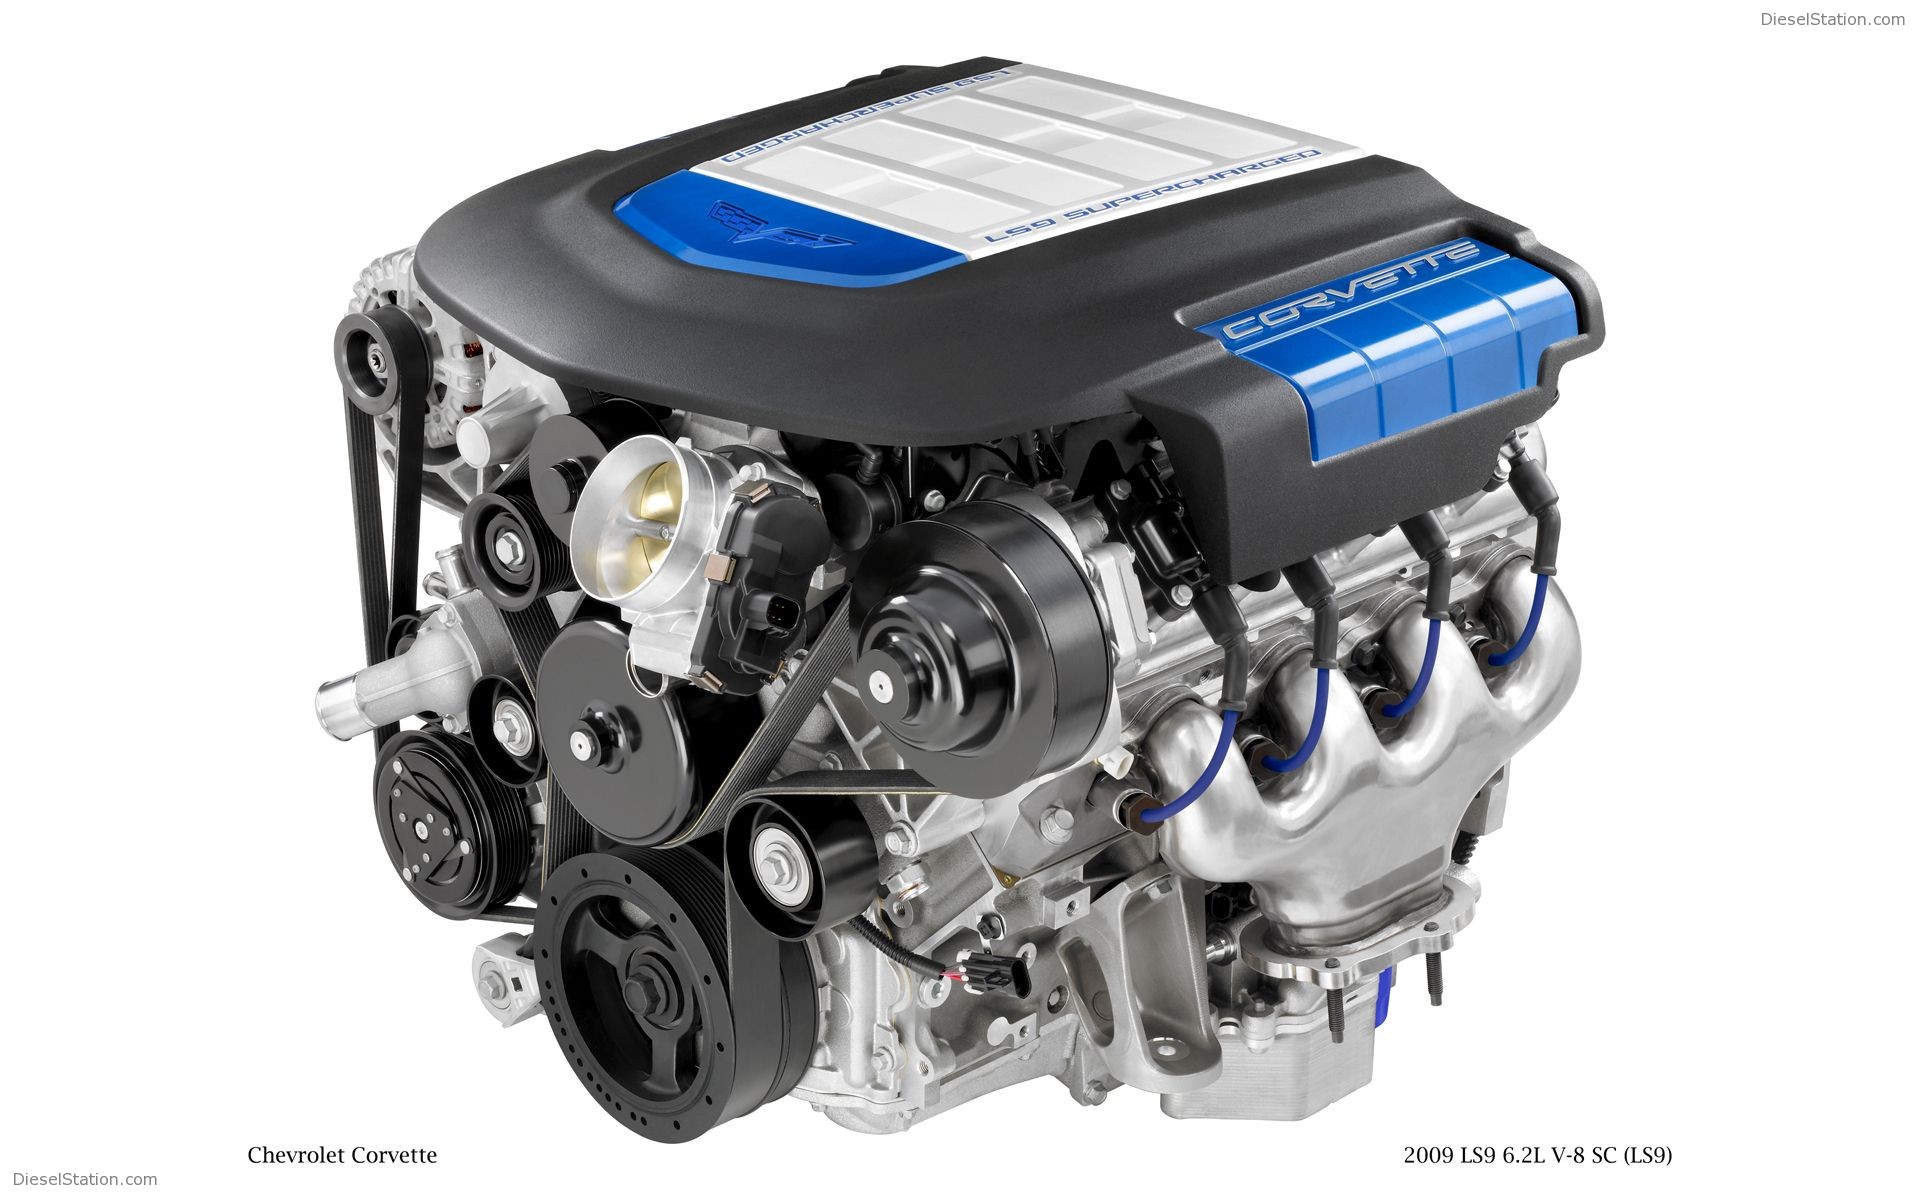 Gm Engine Res Release Date Price And Specs